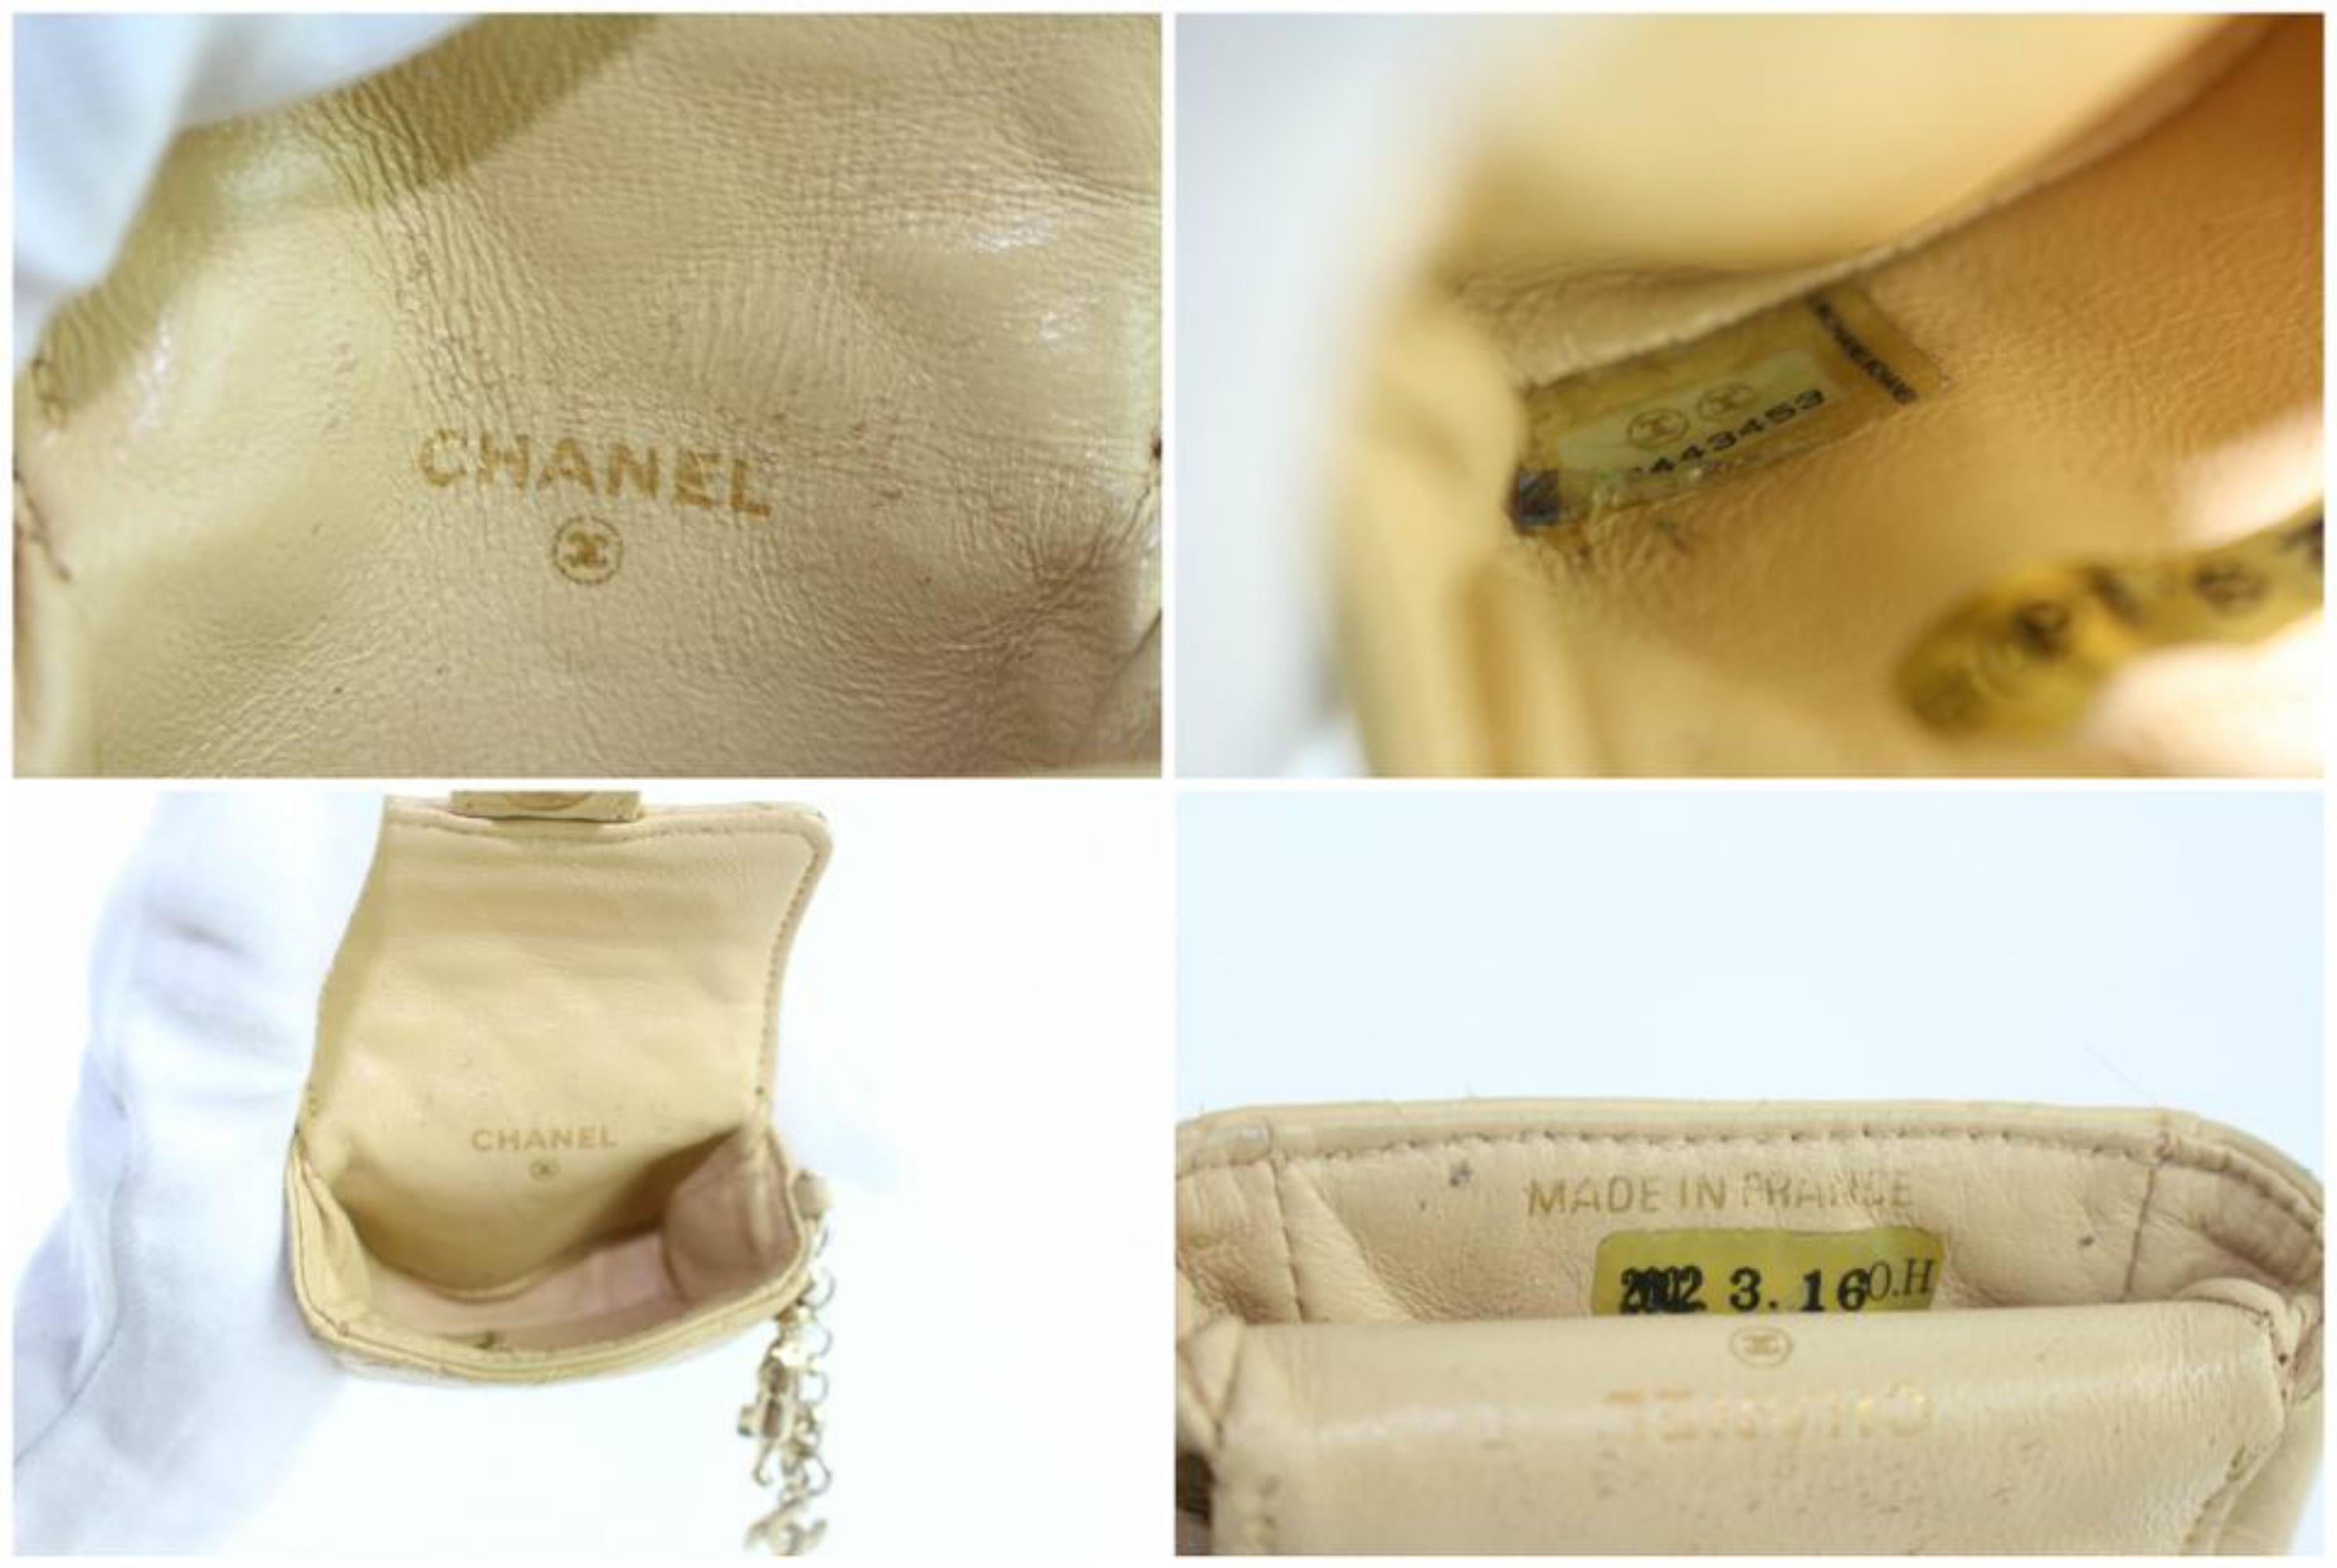 Chanel Chain Belt Fanny Pack Waist Pouch 227070 Beige Leather Cross Body Bag In Good Condition For Sale In Forest Hills, NY